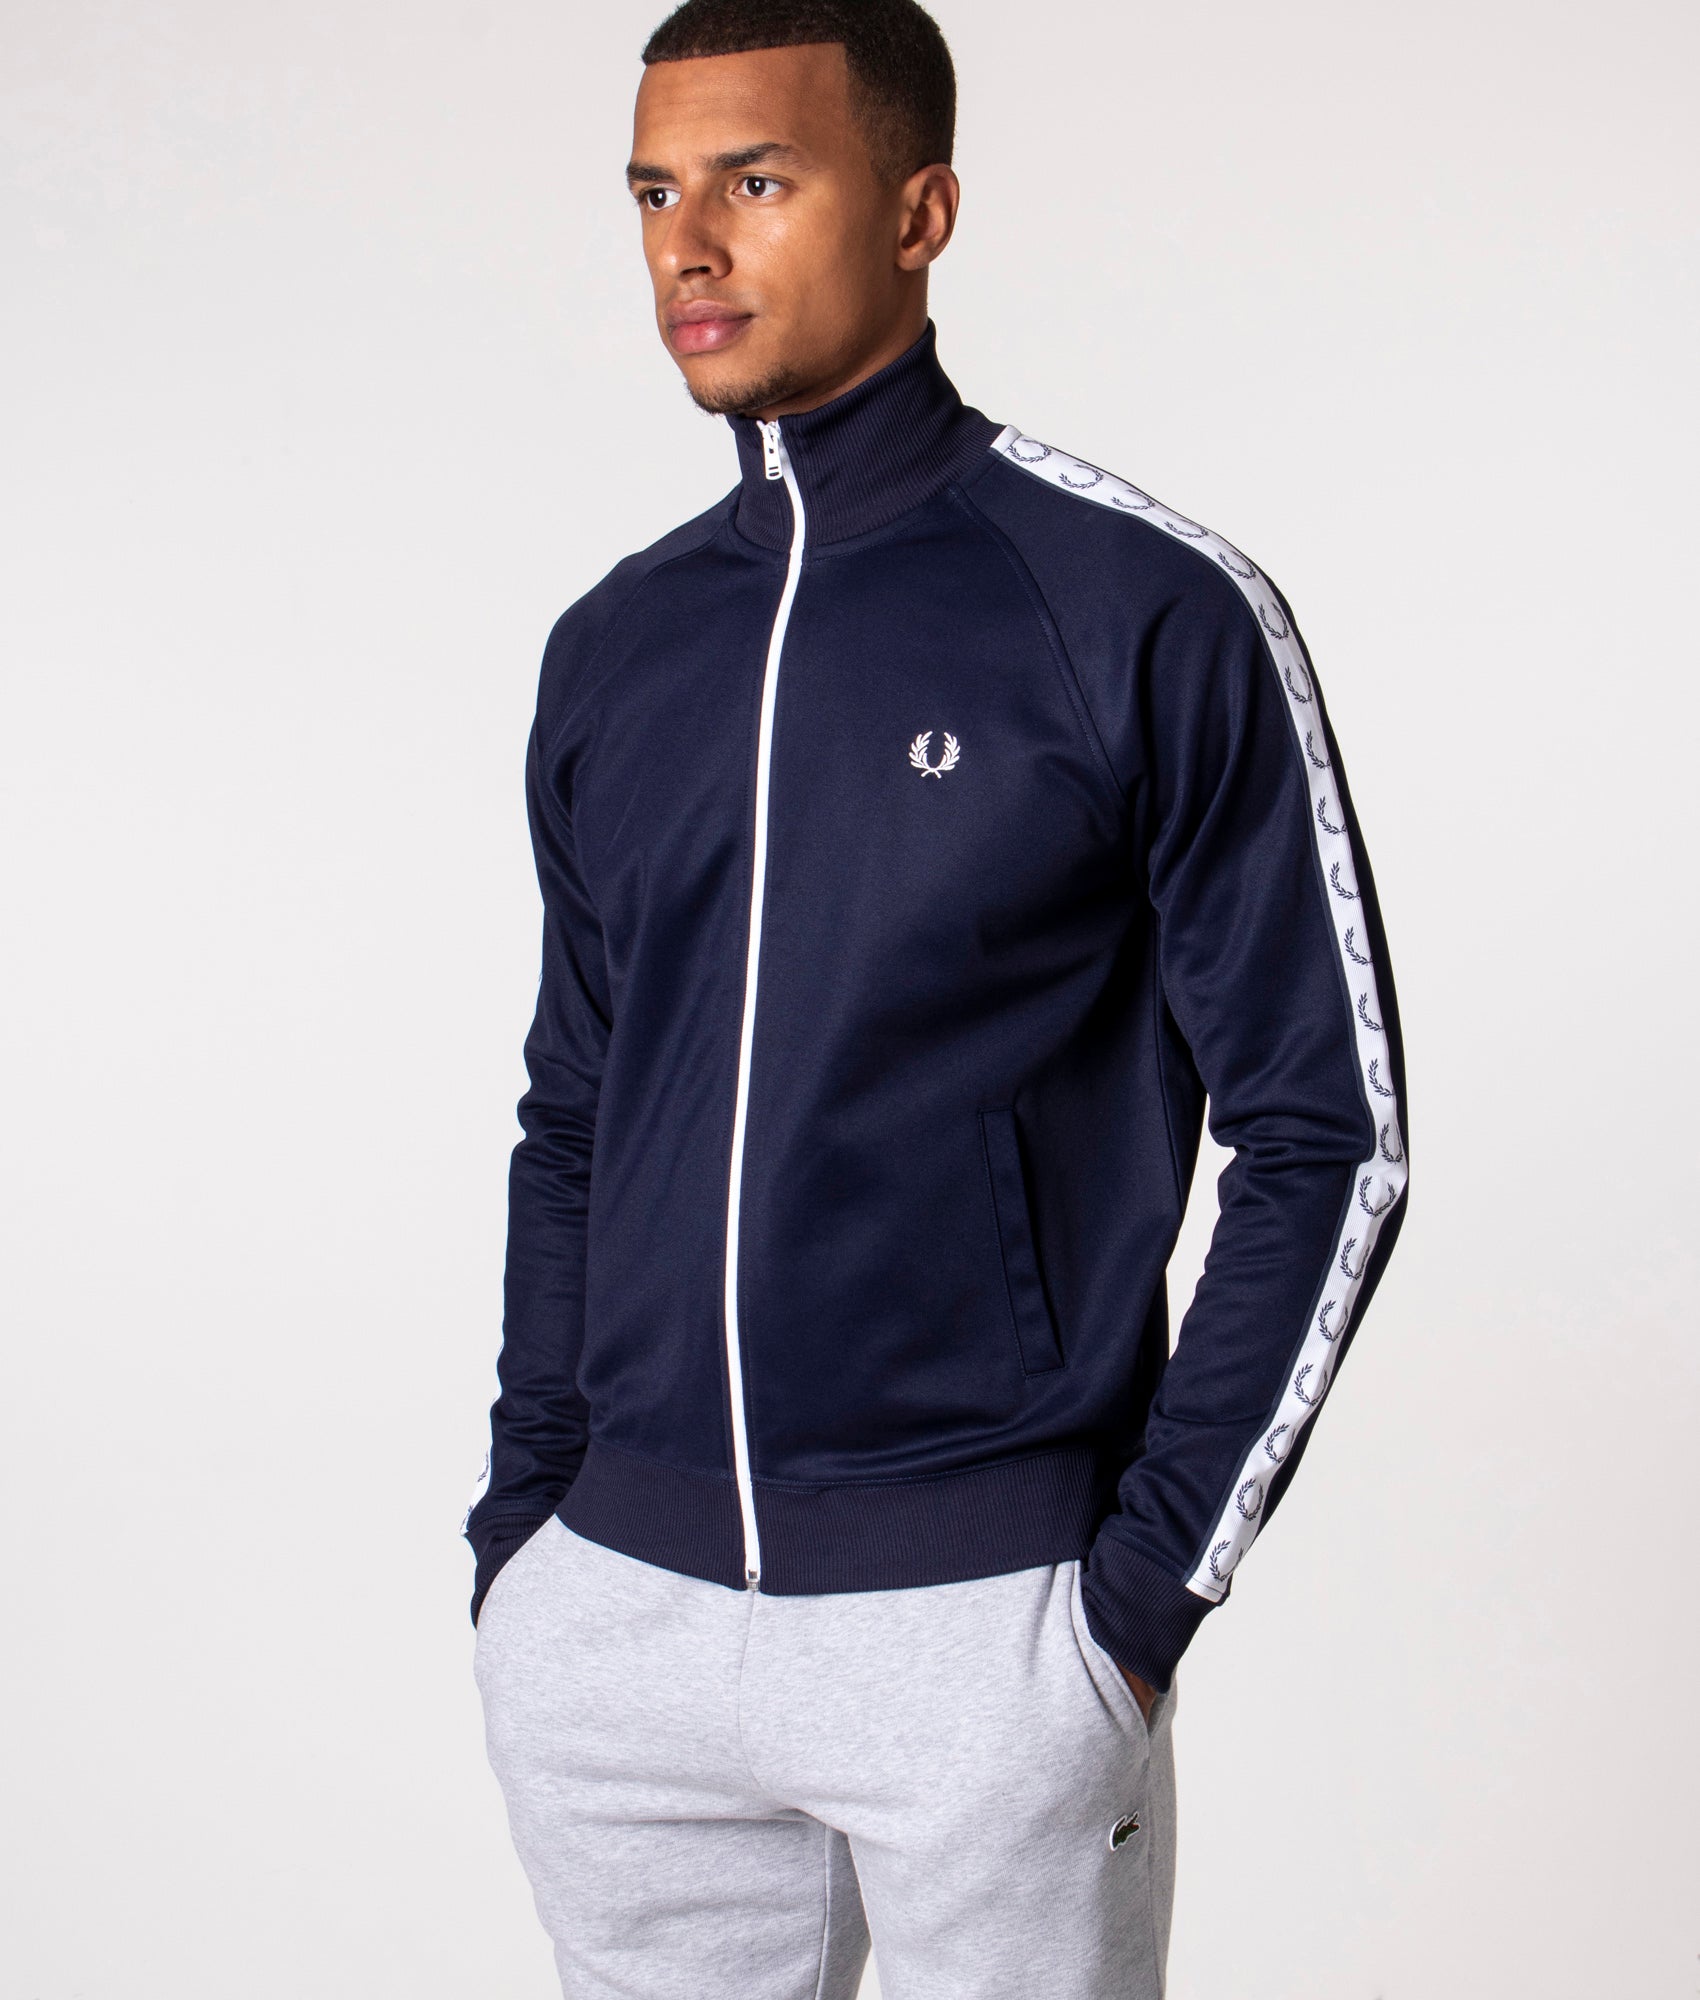 Fred Perry Mens Zip Through Taped Track Top - Colour: 885 Carbon Blue - Size: Medium